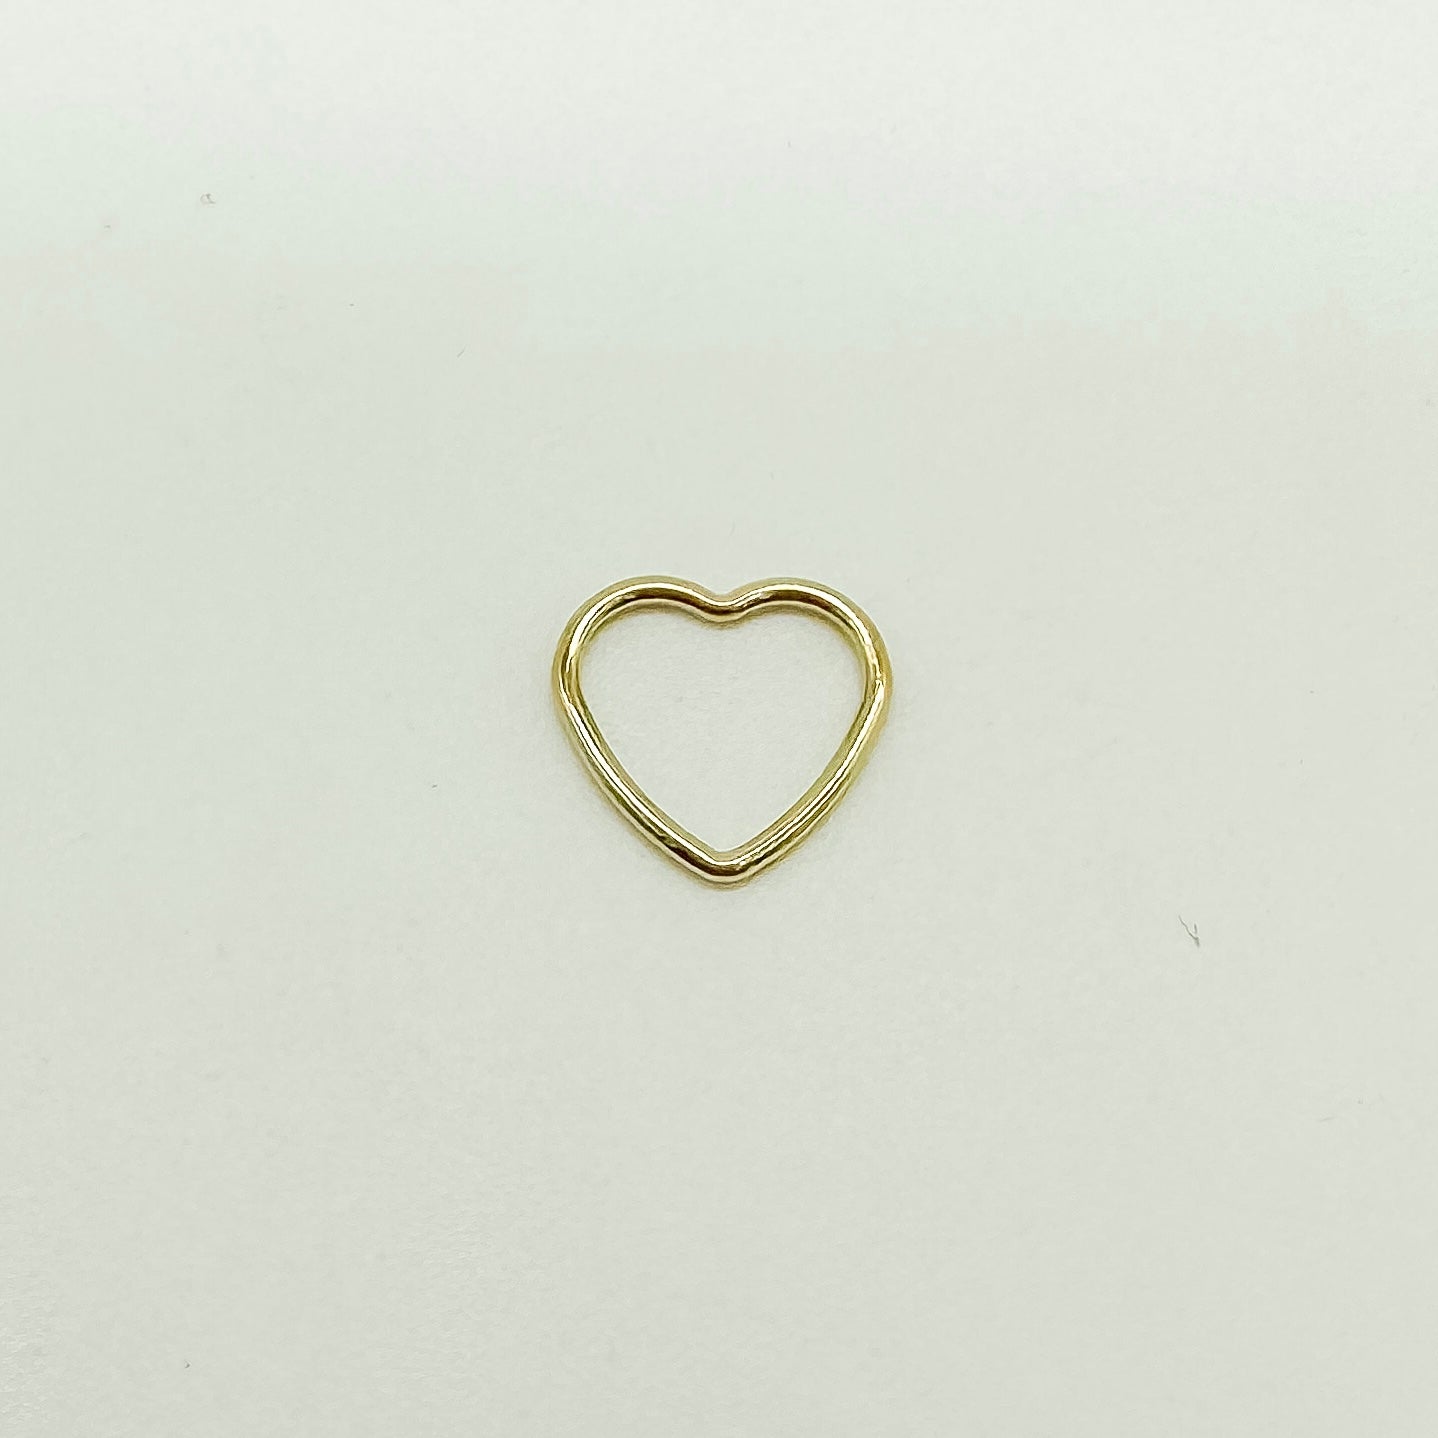 gold filled heart connector, permanent jewelry connector, permanent jewelry supplies, connectors, bracelet connector